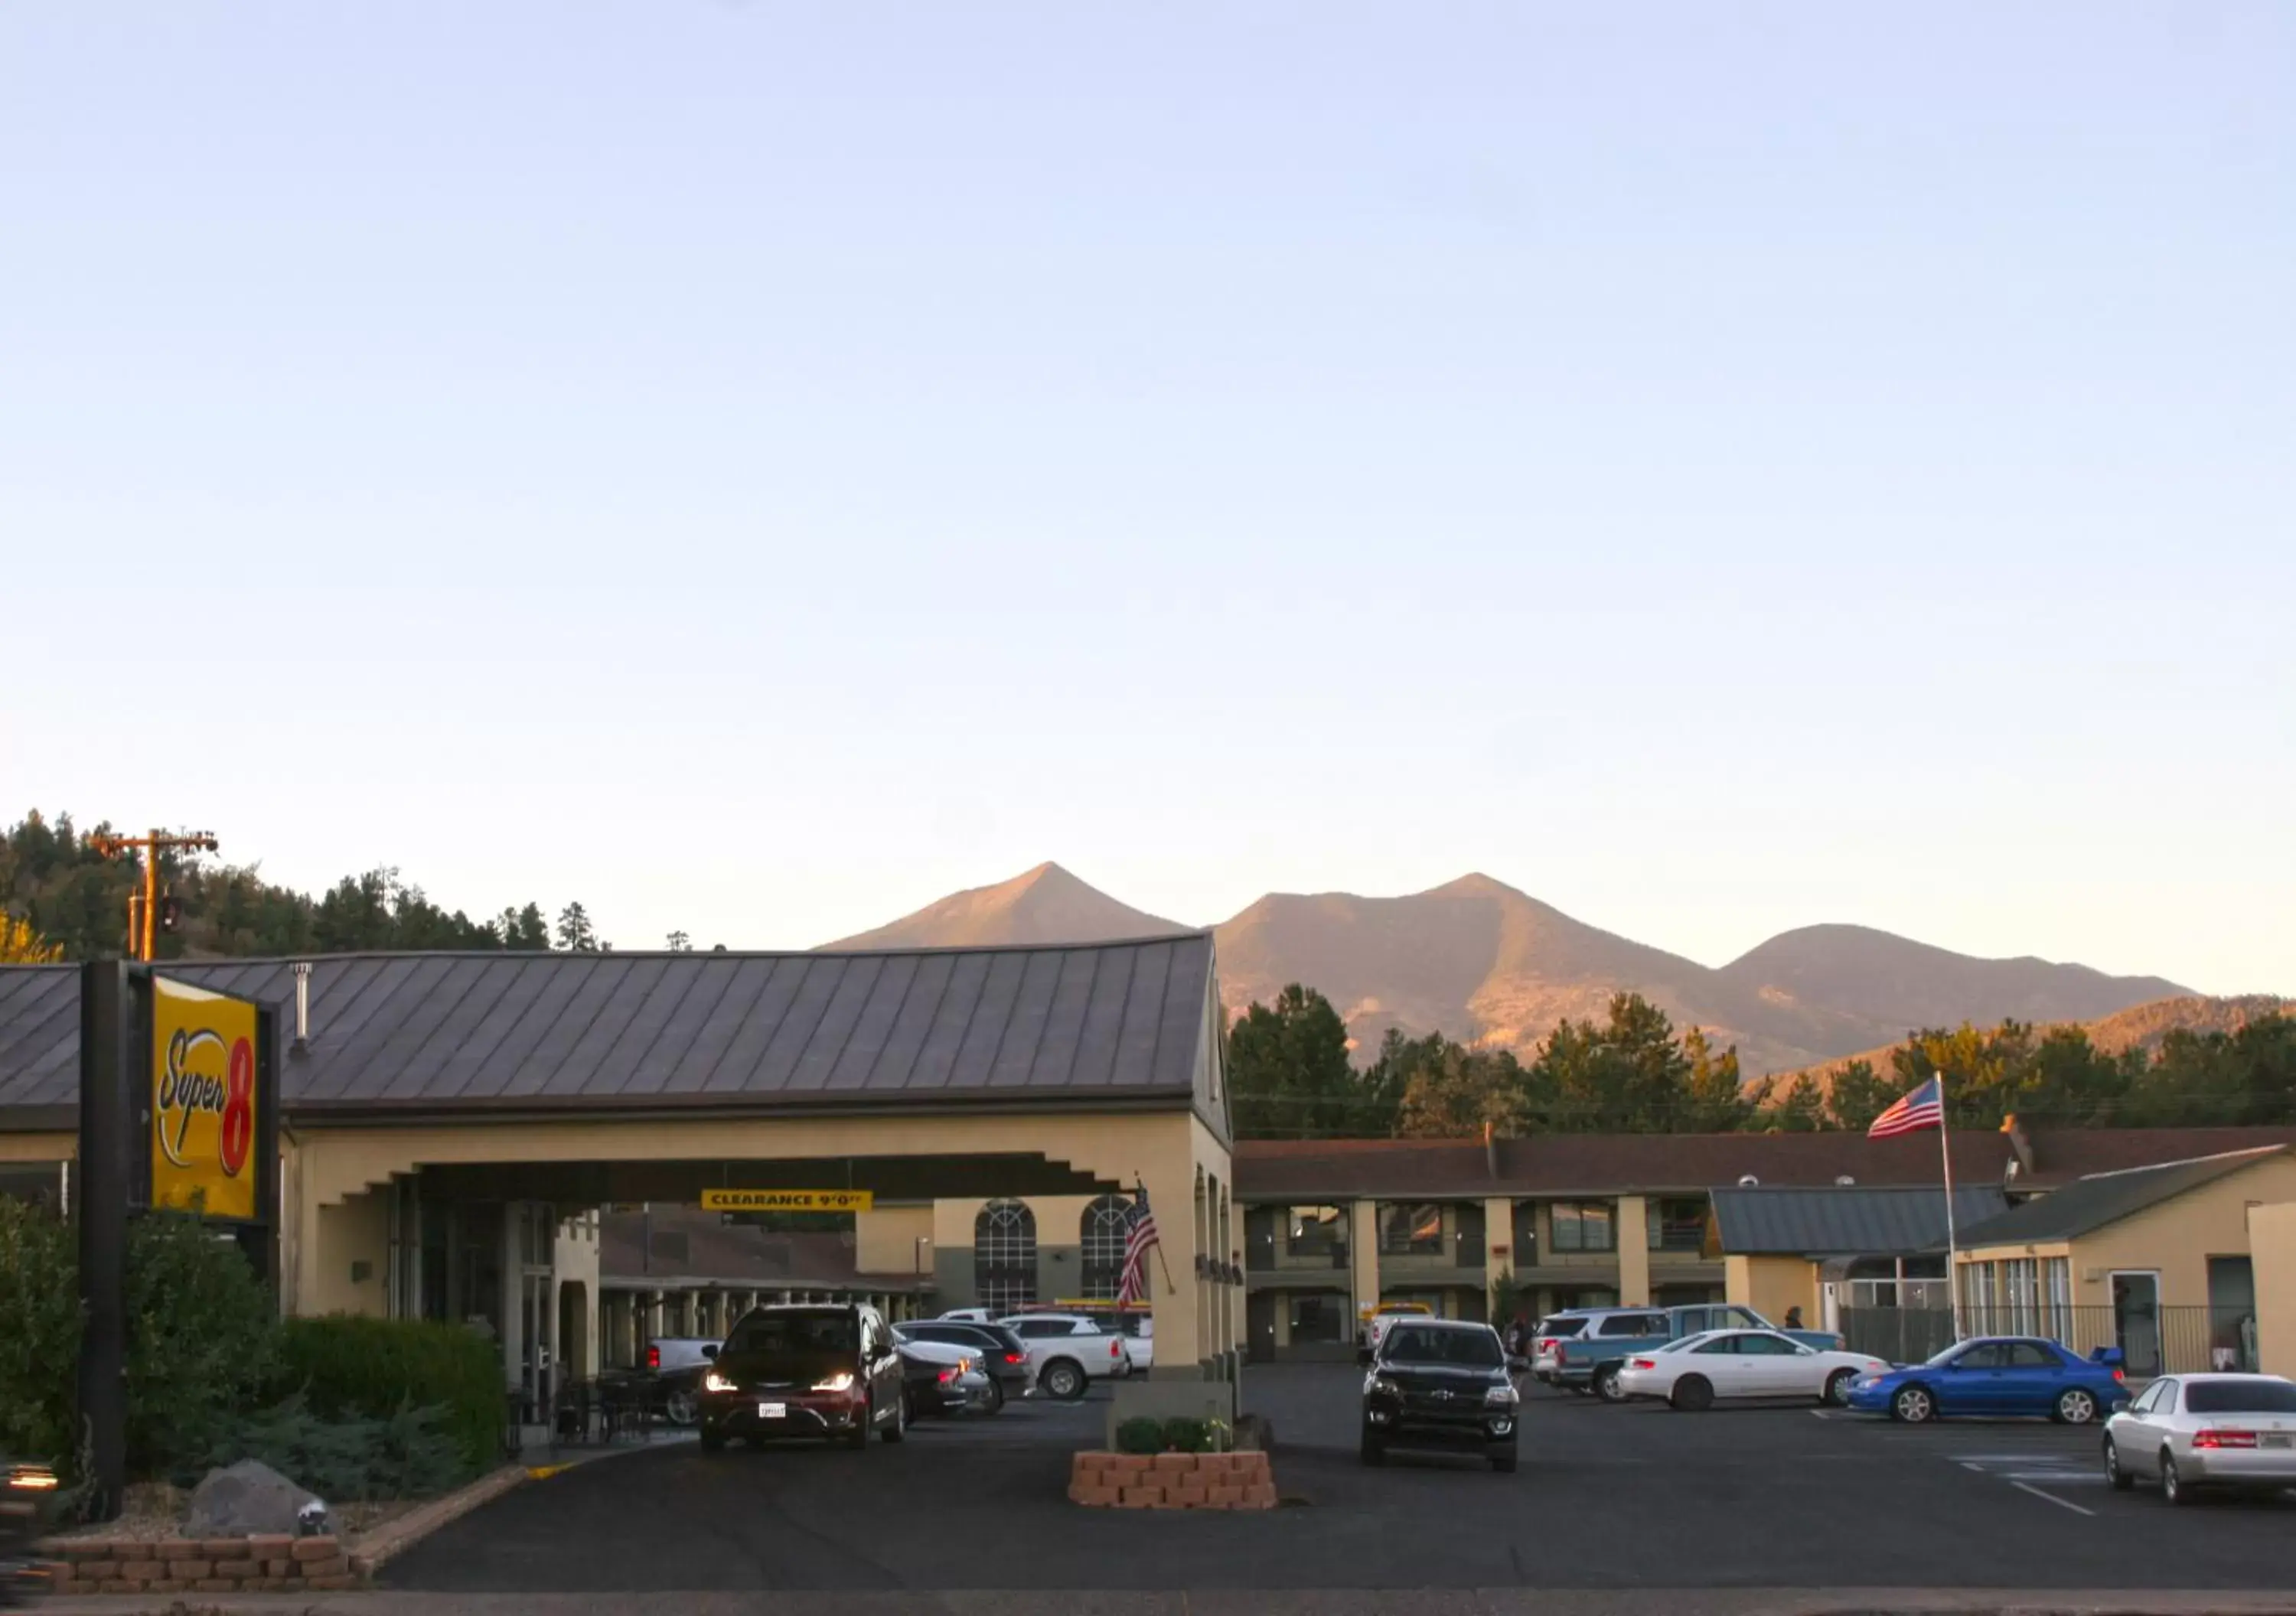 Property Building in Super 8 by Wyndham NAU/Downtown Conference Center